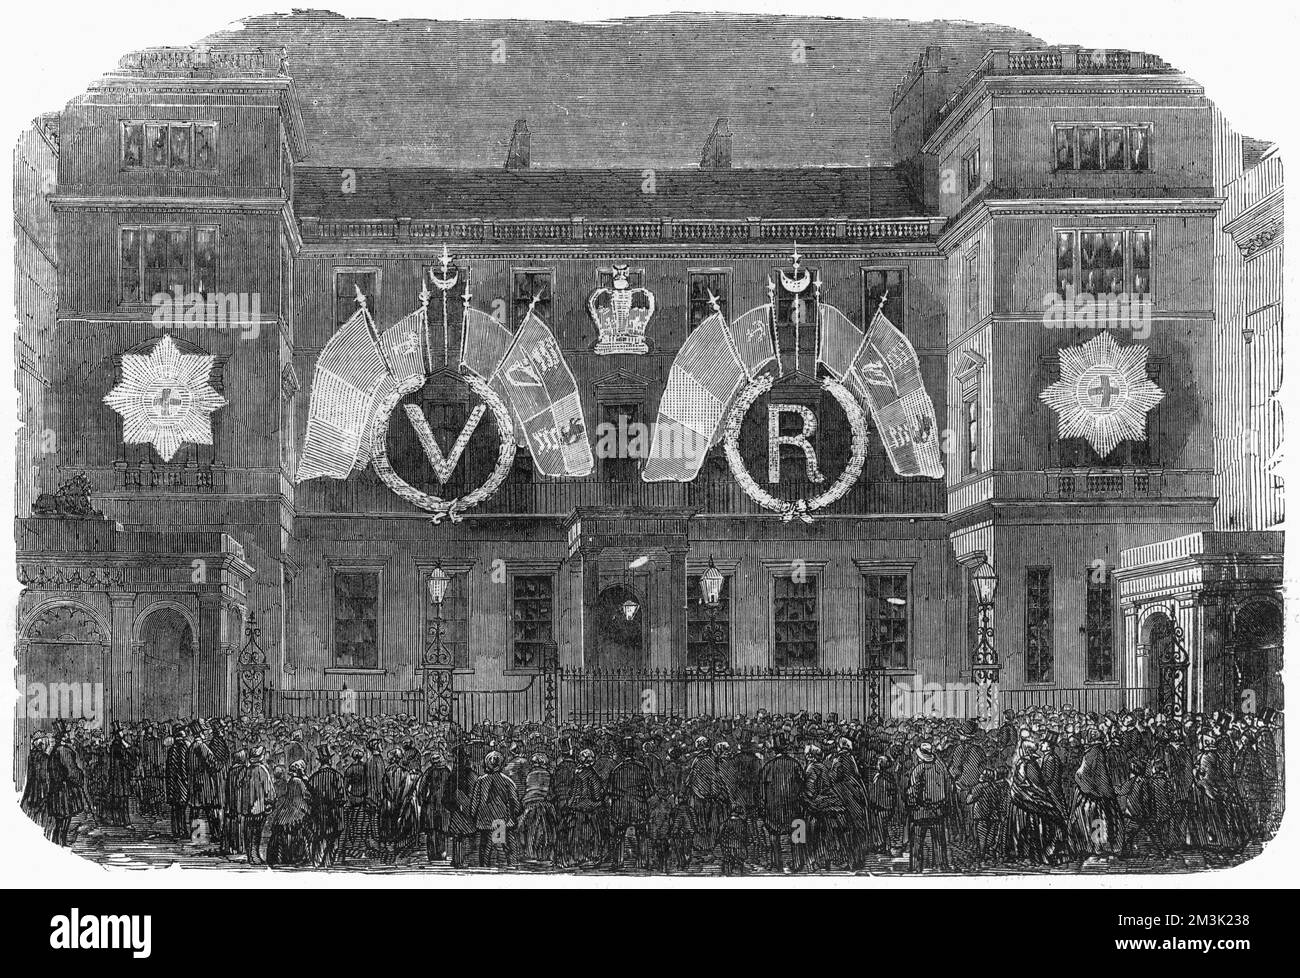 Fireworks and illuminations cheered the populace on the cessation of hostilities in the Crimean War. In this engraving the Ordnance Office, Pall Mall, London is illuminated with images of the garter and the Queen's insignia, VR.  1856 Stock Photo